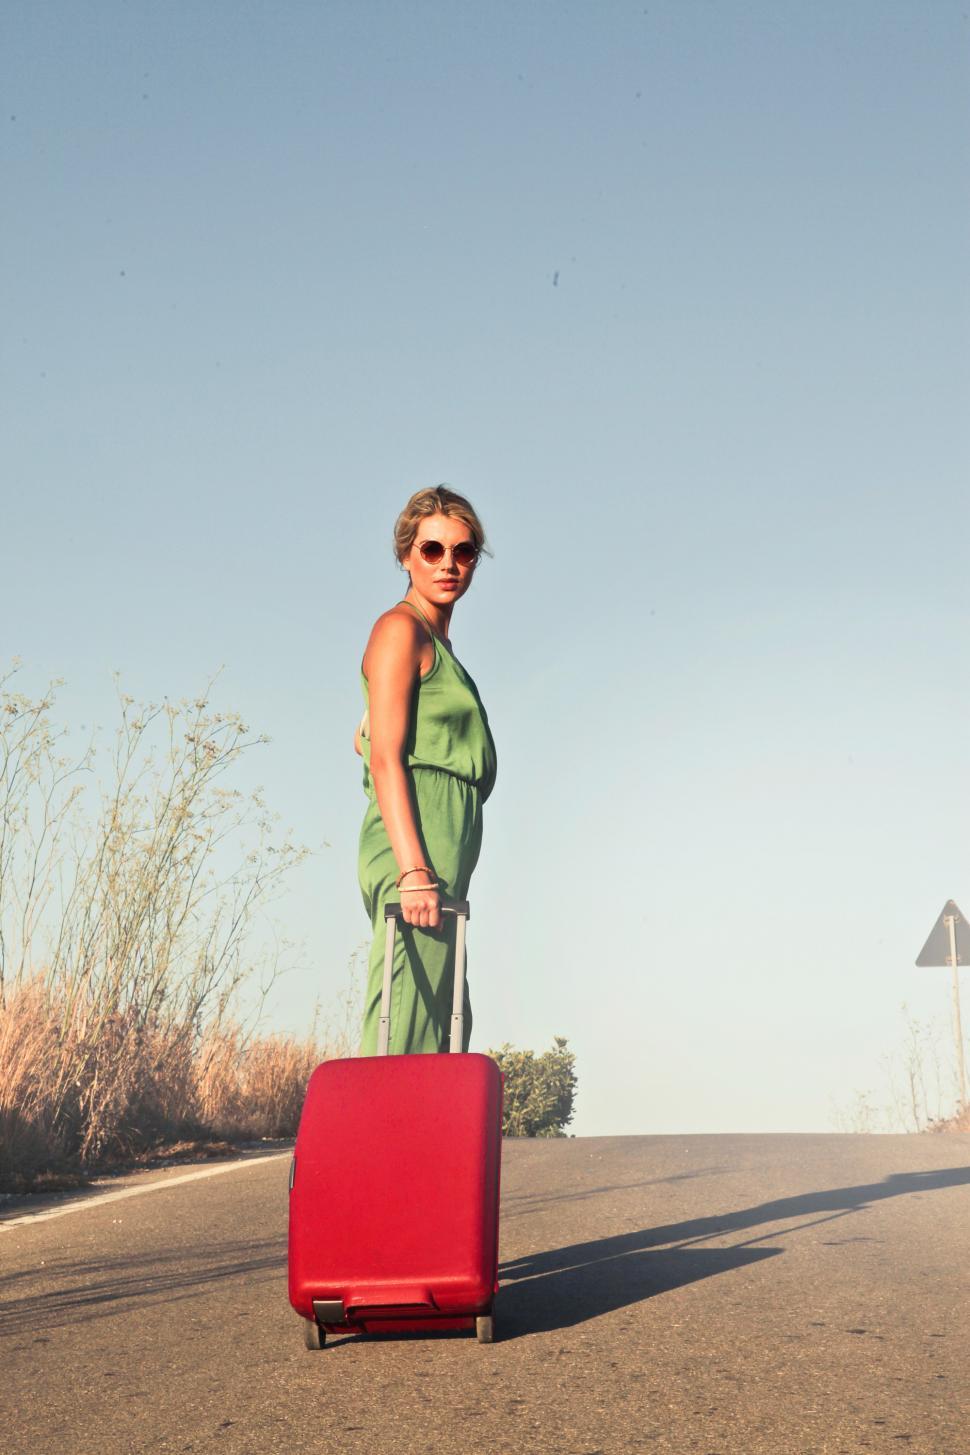 Free Image of A young blonde woman posing with red luggage trolley Bag 